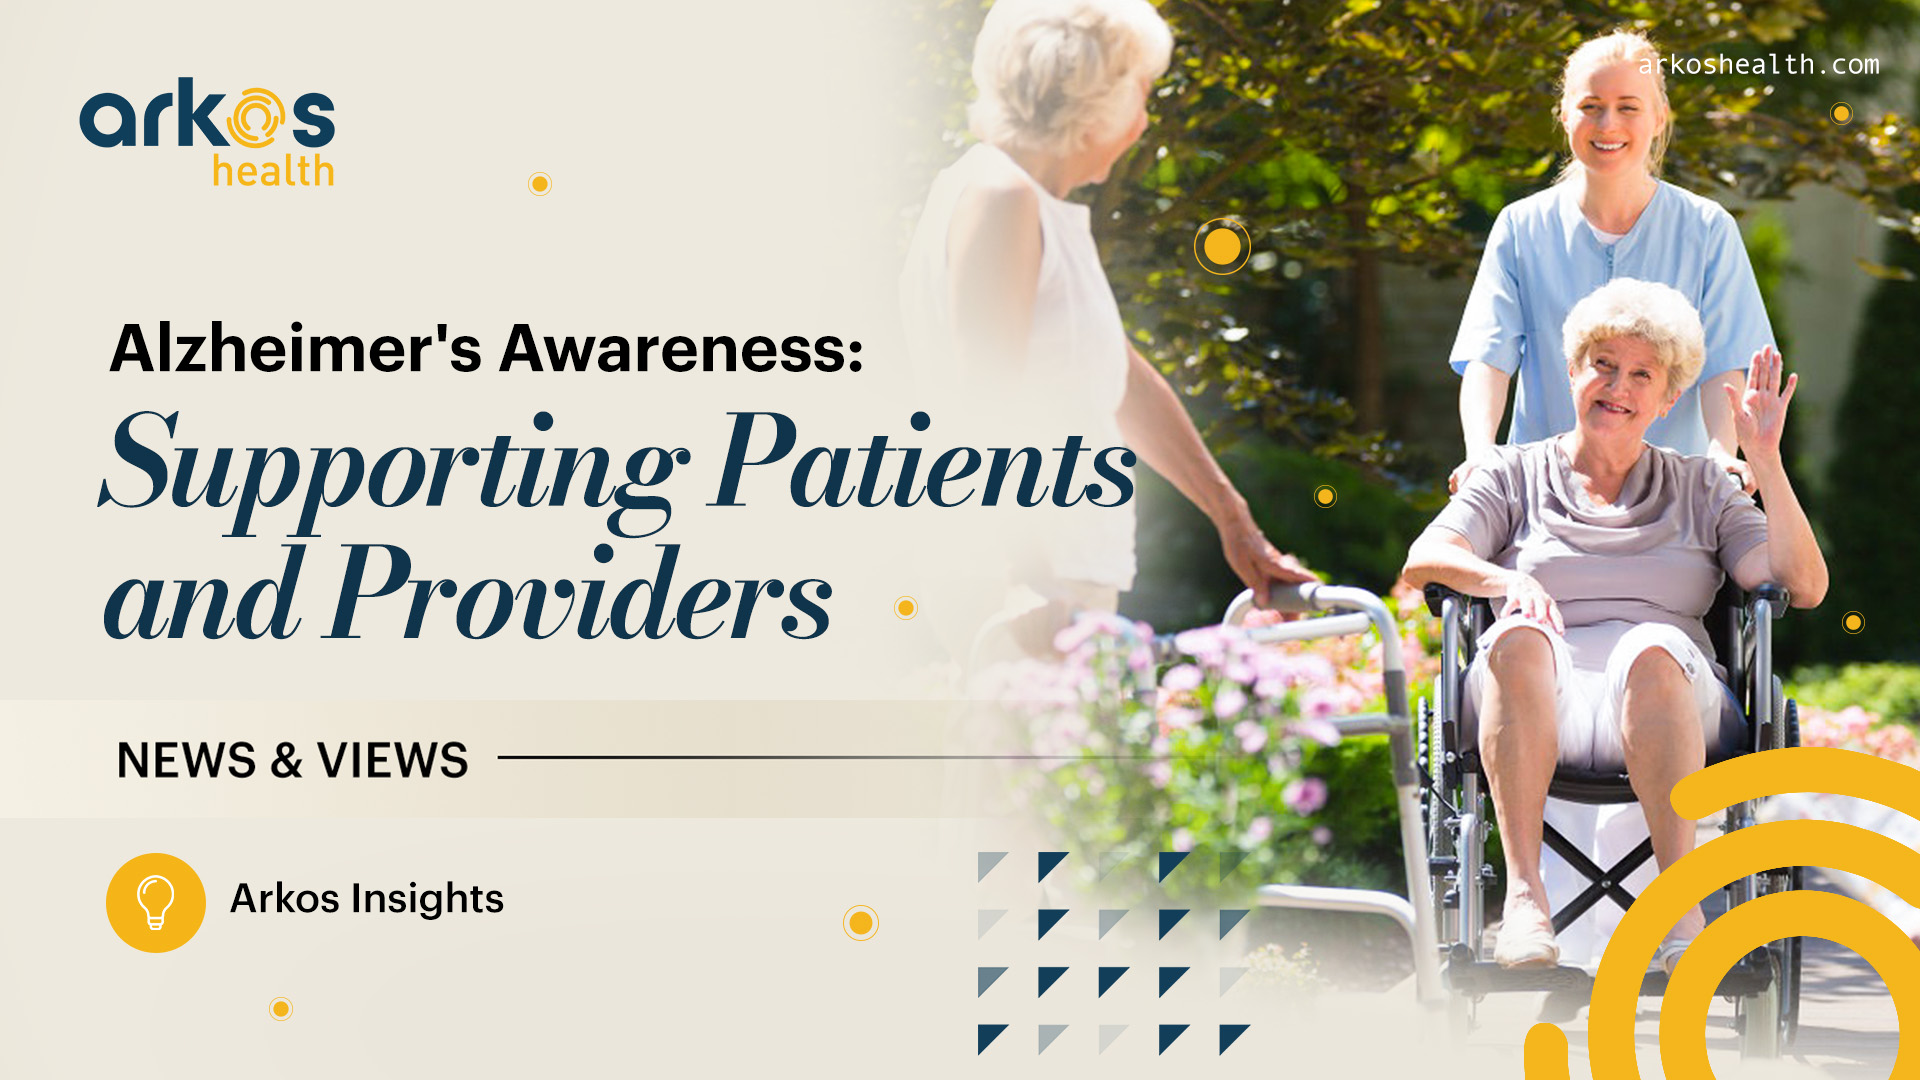 During National Alzheimer’s Awareness Month We Advocate for Patients and Recognize Providers